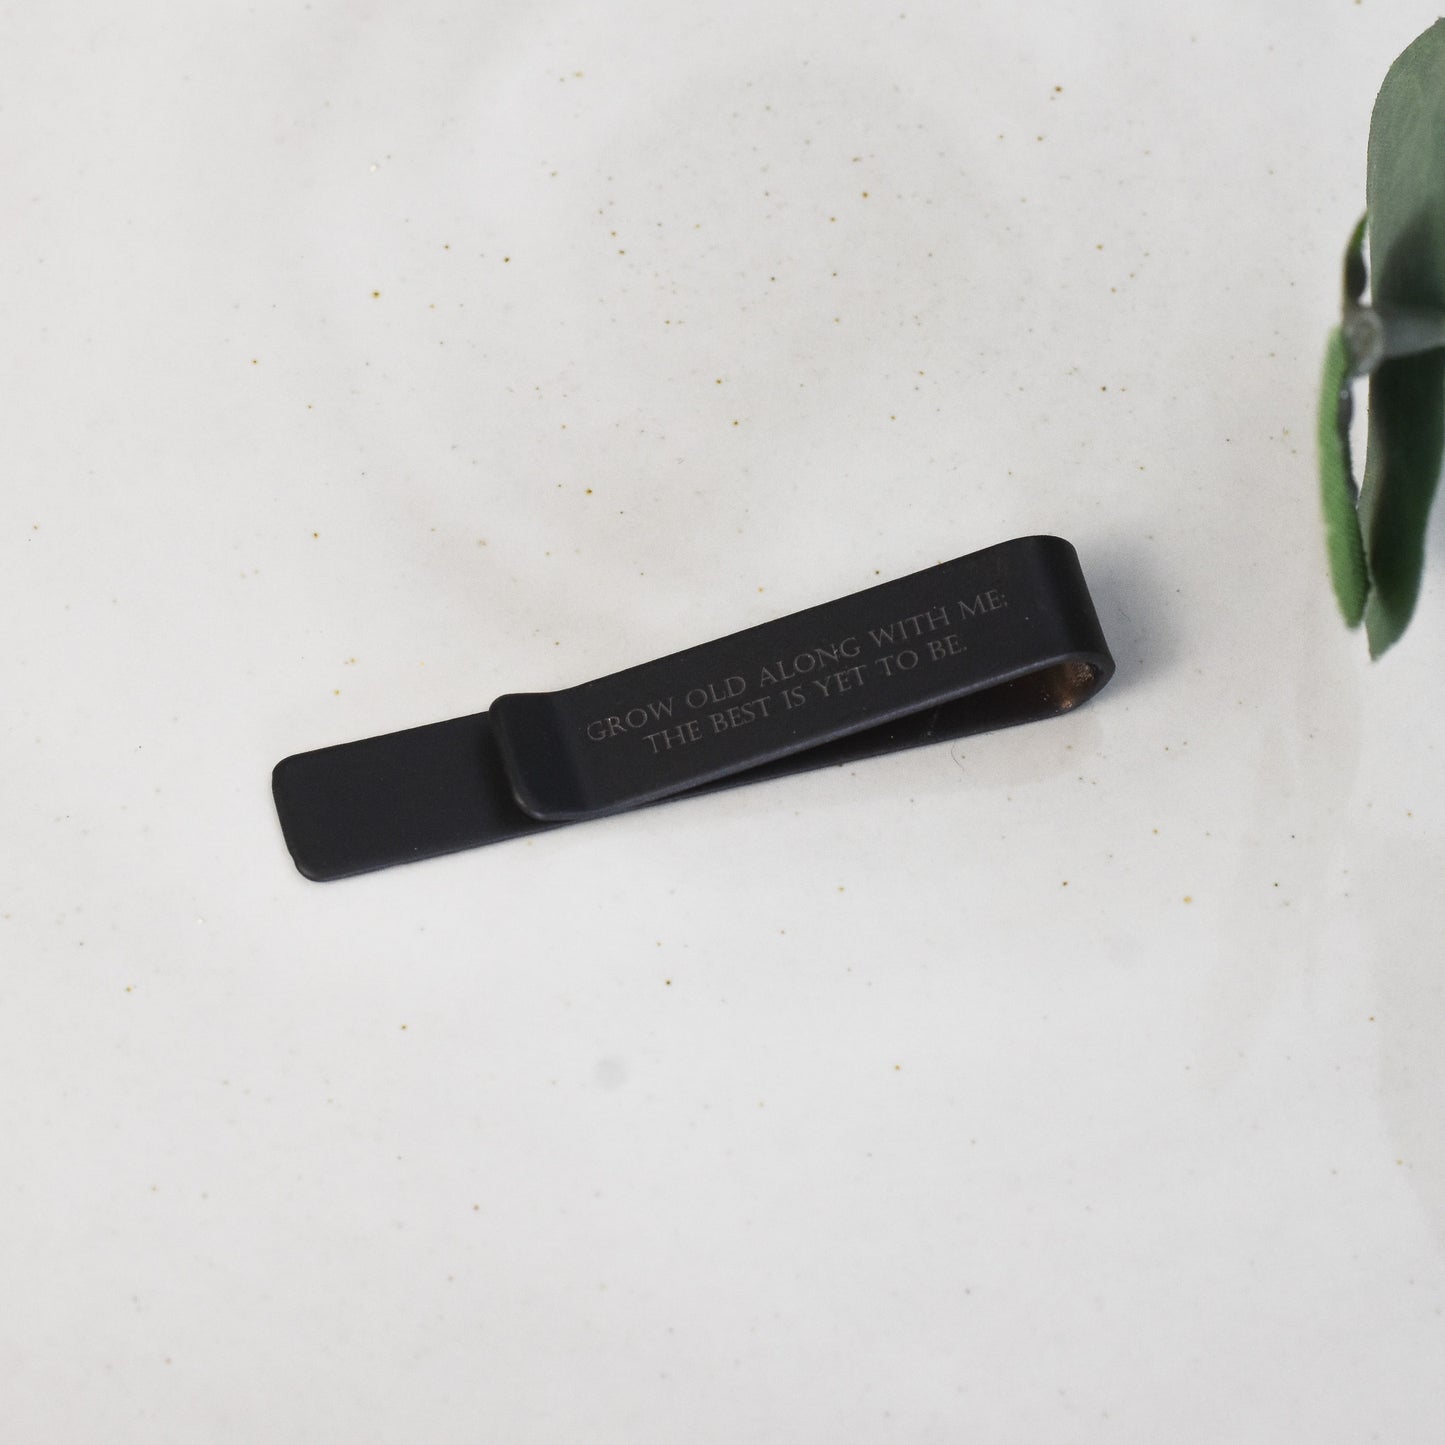 Custom engraved black tie bar with text in back hidden when worn on tie for personal message.